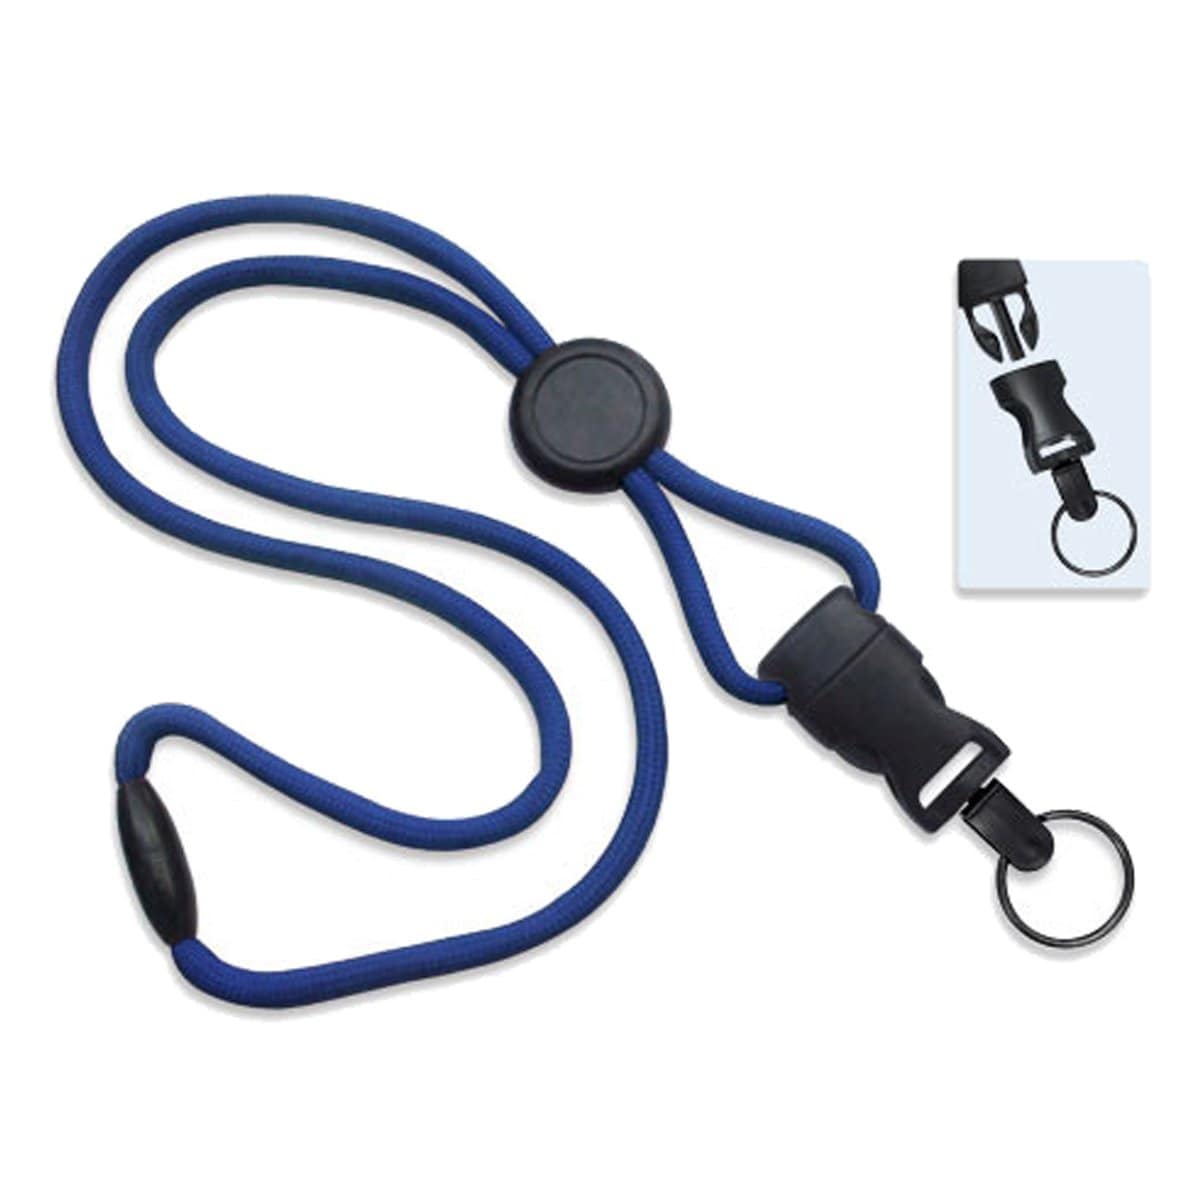 Royal Blue Breakaway Lanyard with Round Slider And Detachable Key Ring 2135-461X 2135-4614